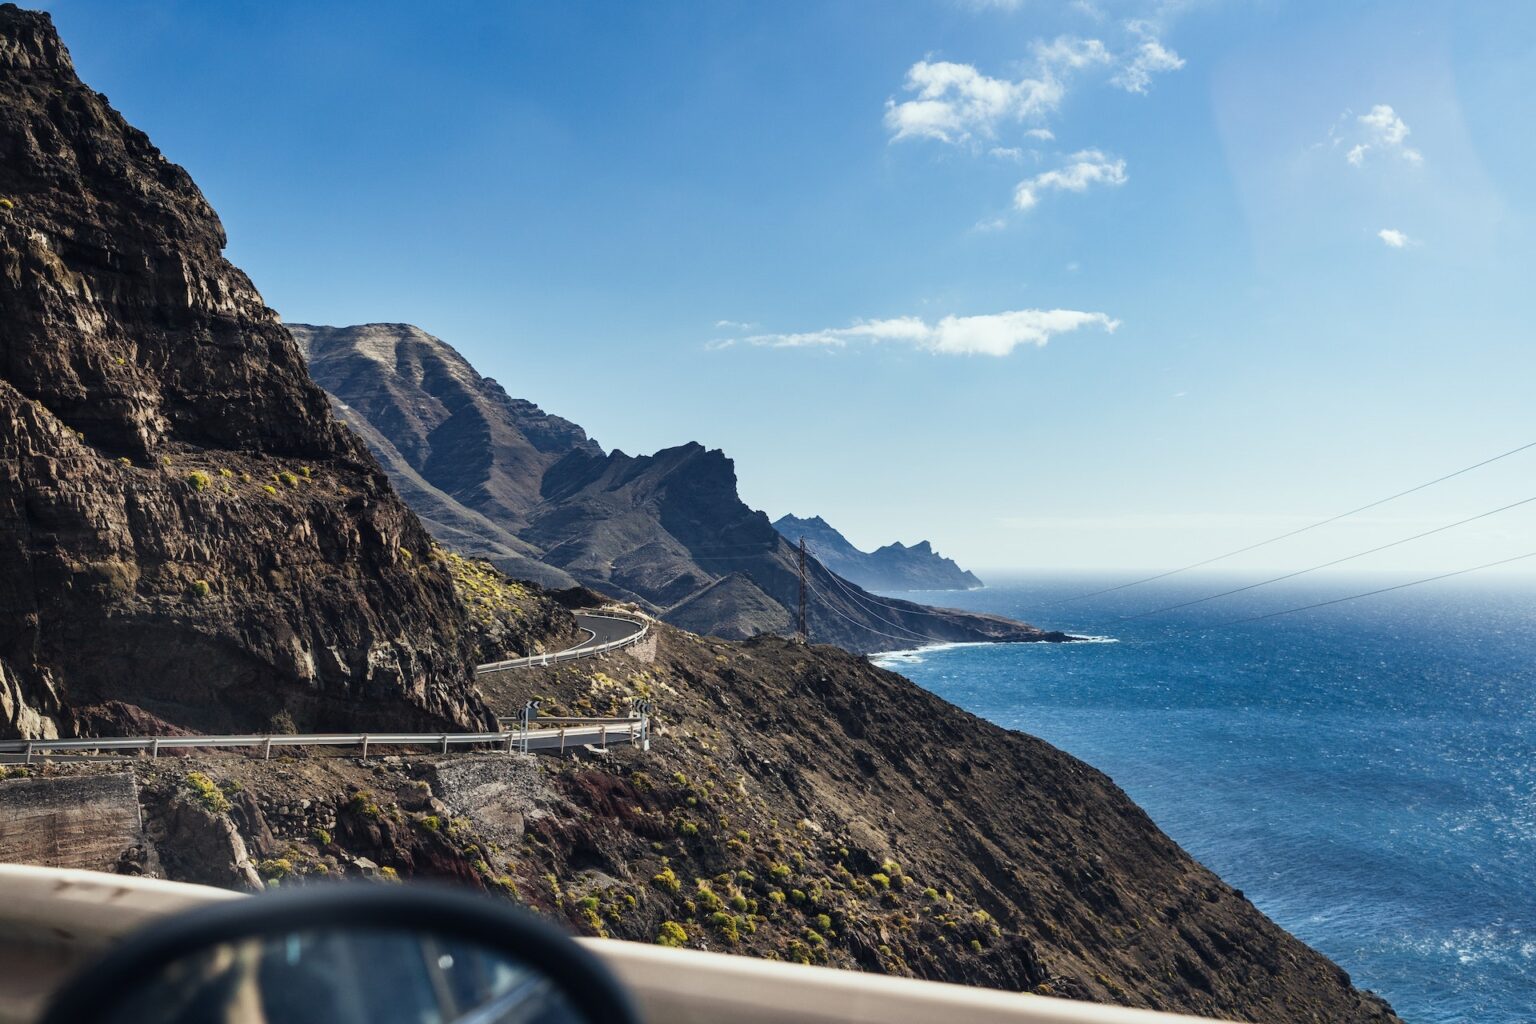 One of the biggest appeals of Gran Canaria is that it has something for everyone. Here's why this is the perfect destination.